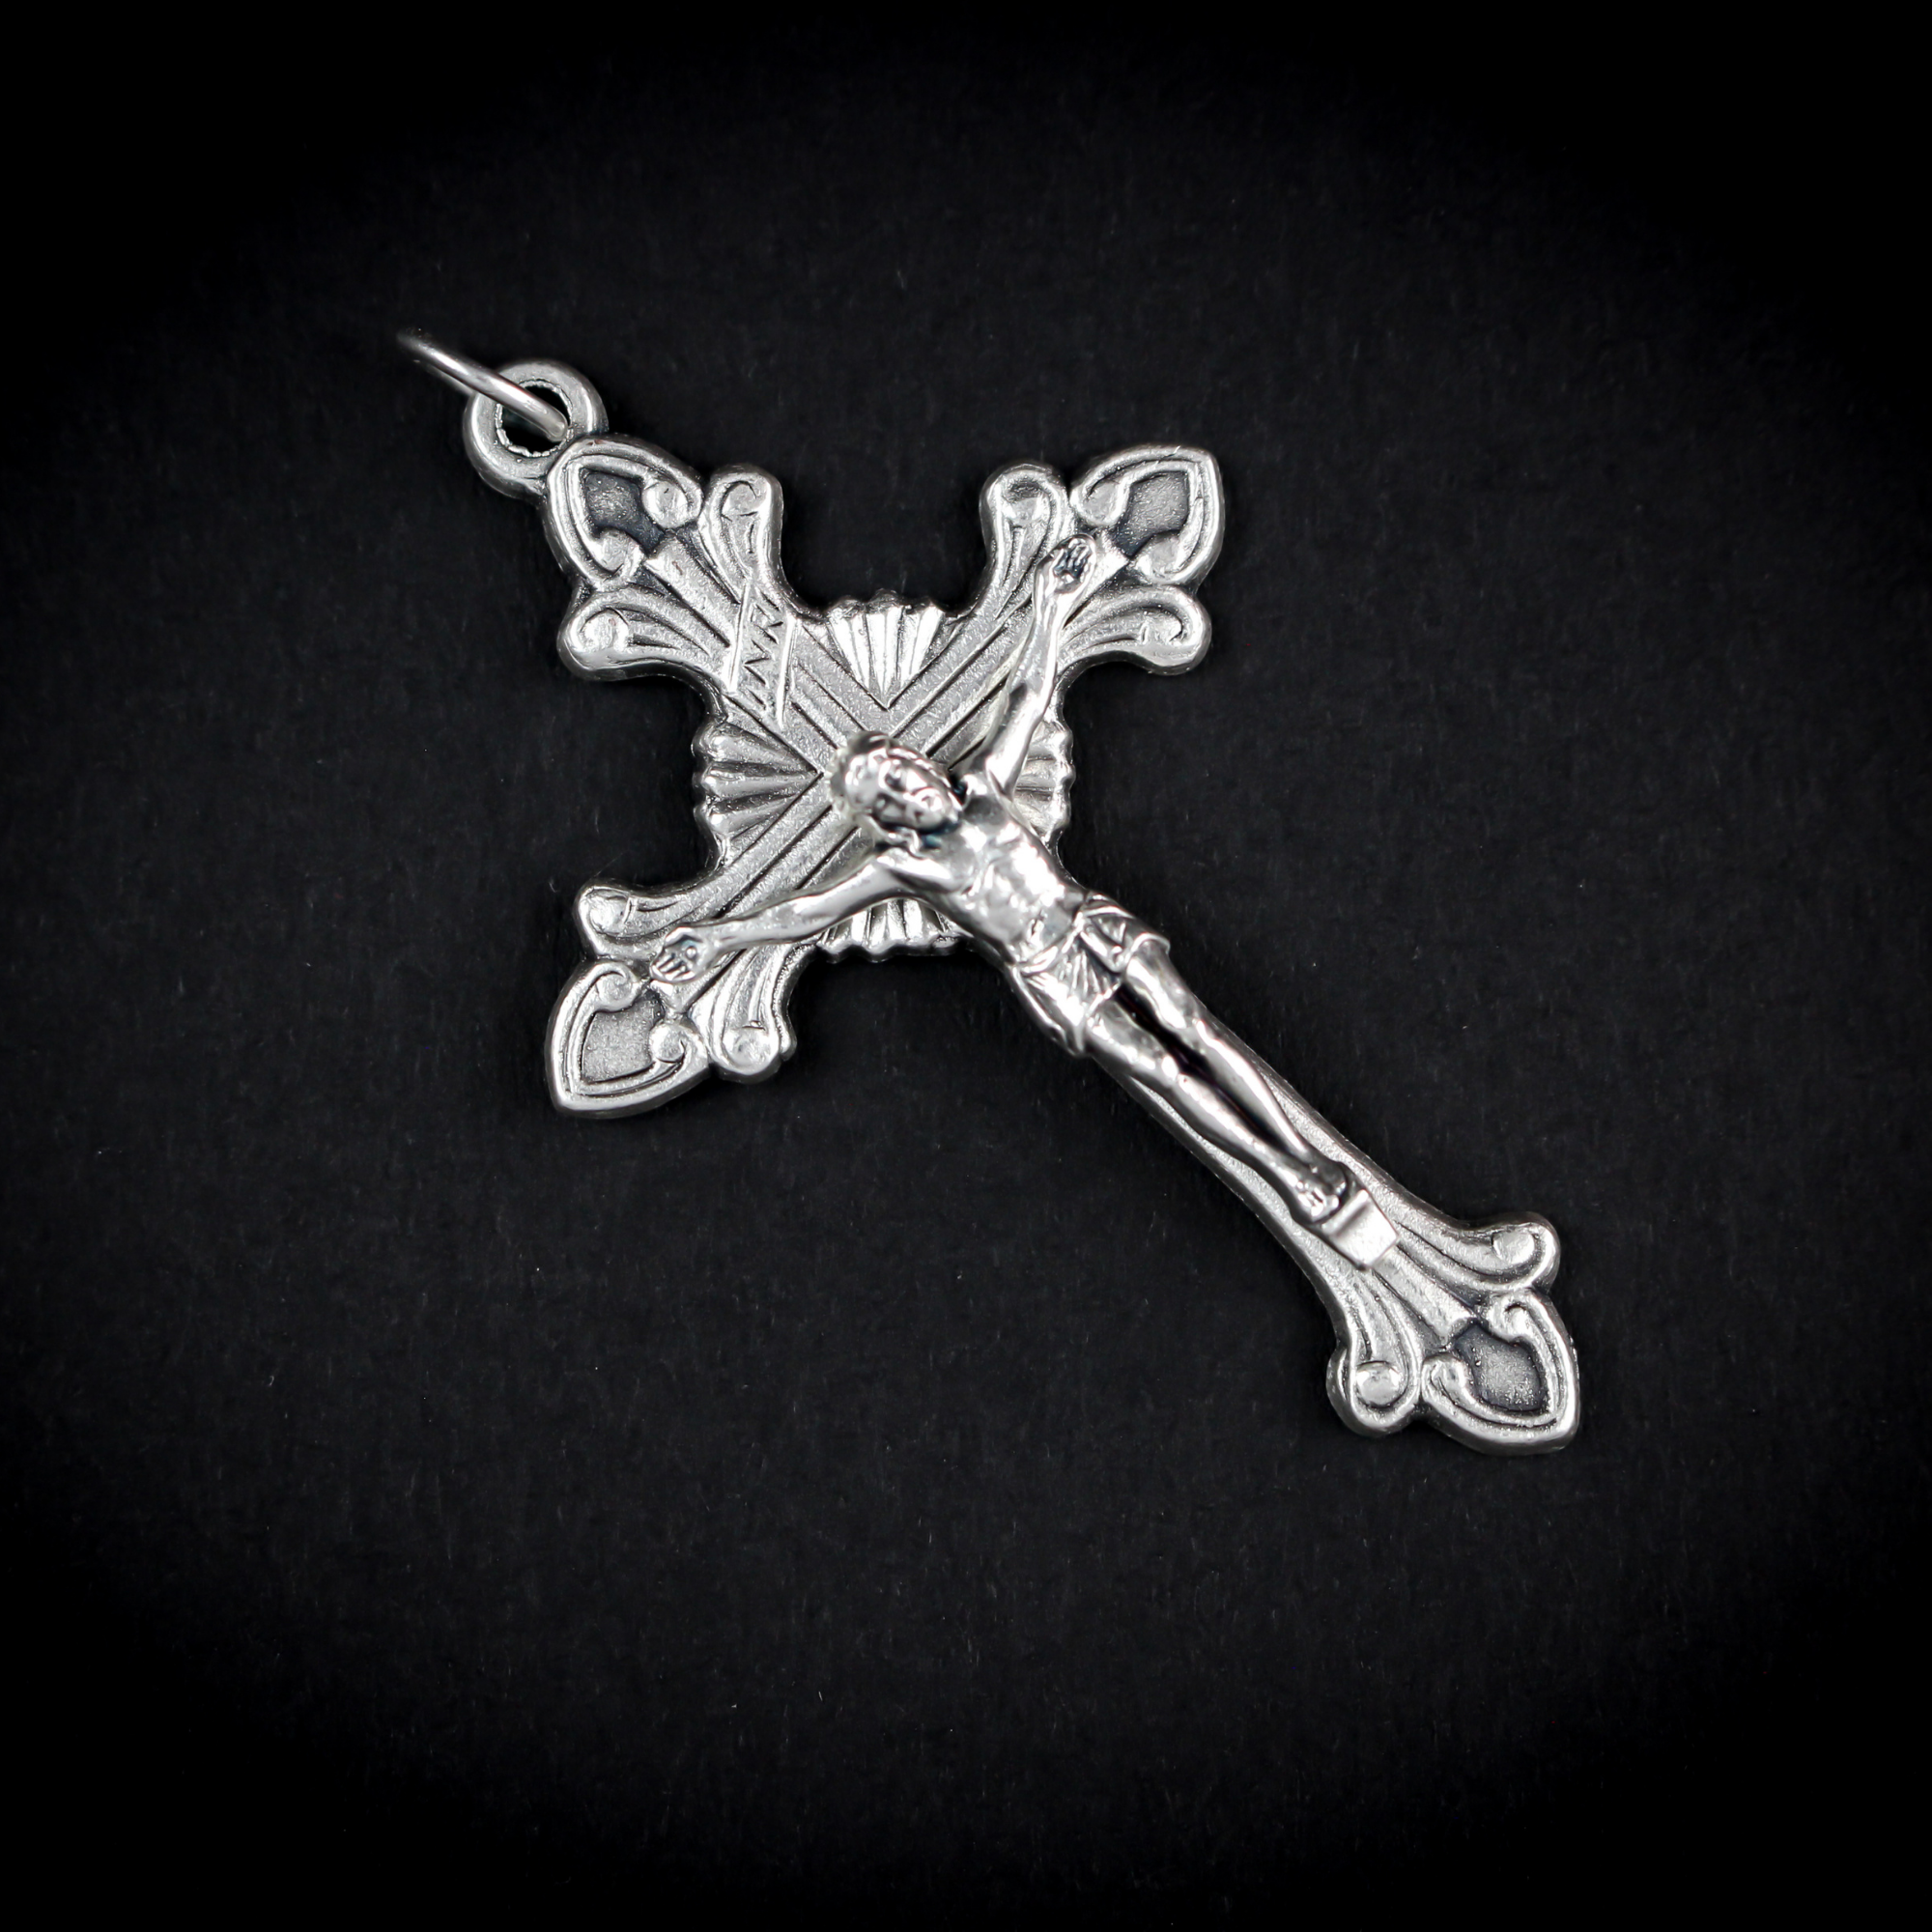 Highly detailed crucifix that features flared edges and a Starburst nimbus behind the crossbeams of the cross.